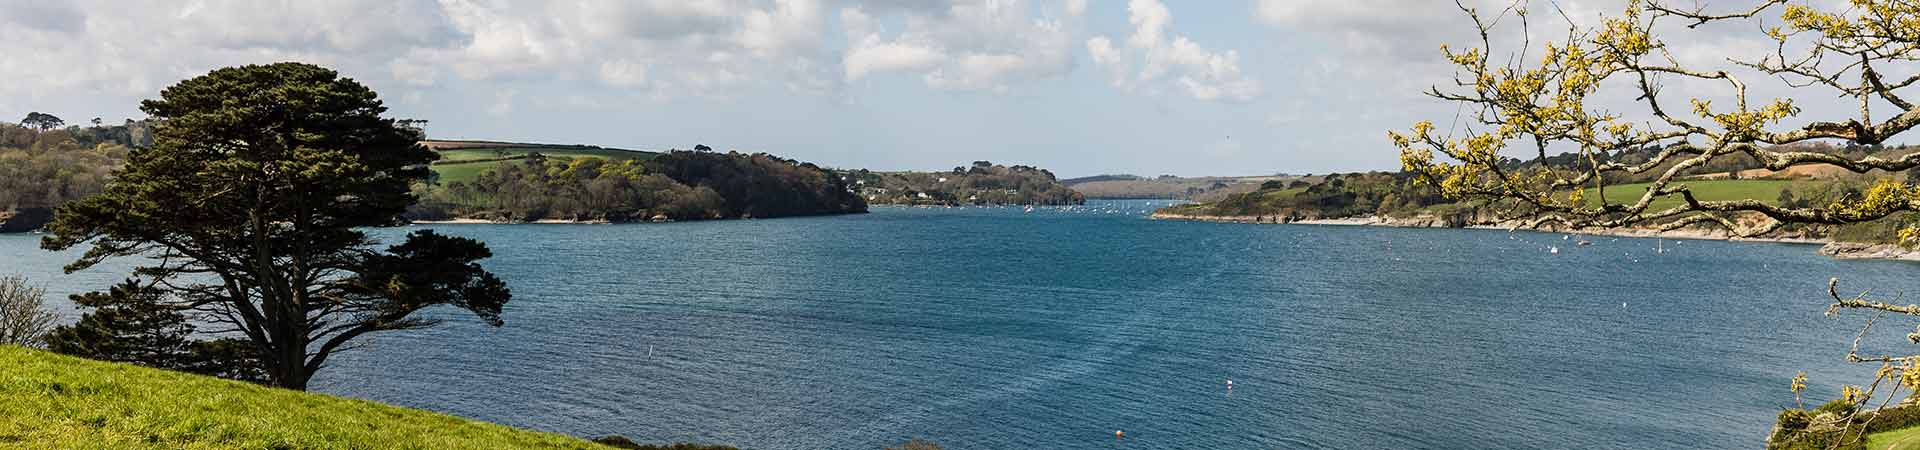 5 things to do on the Helford River